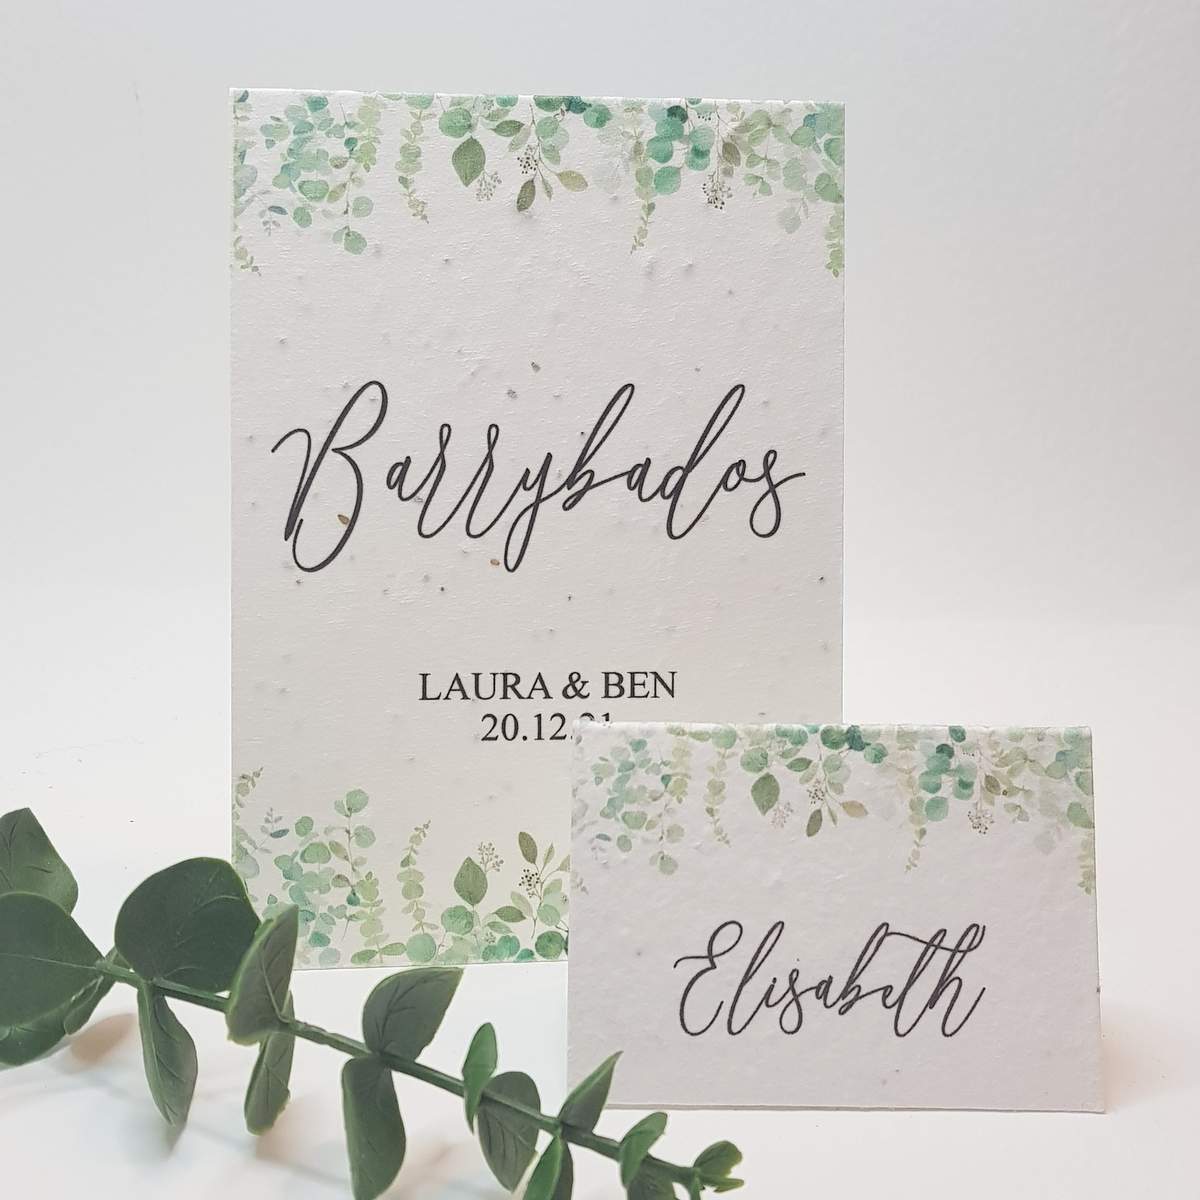 Seed paper place cards and table names for Laura & Ben